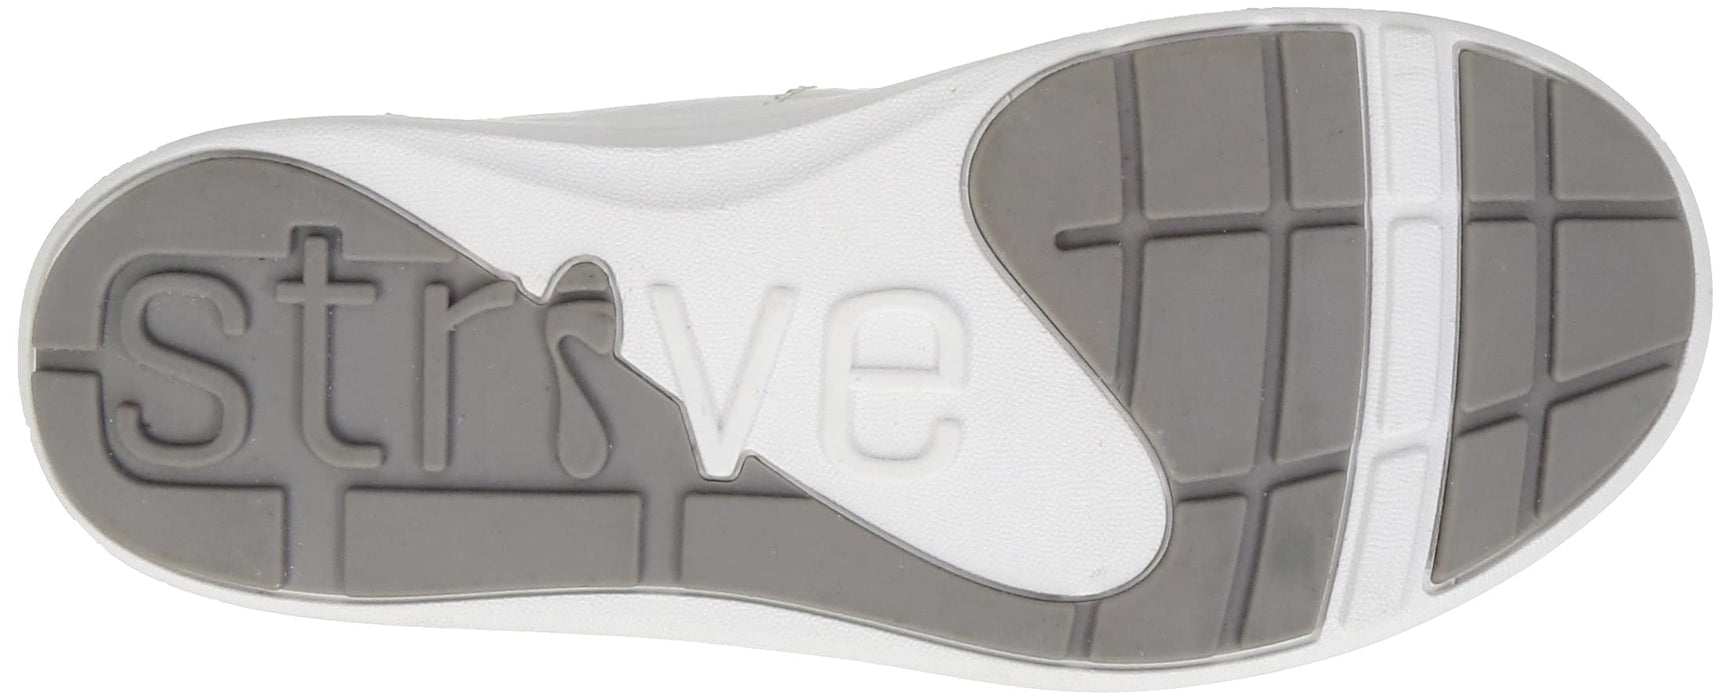 Strive Women's Madison Black Size 6 Built-in Arch Support Orthotic Shoes